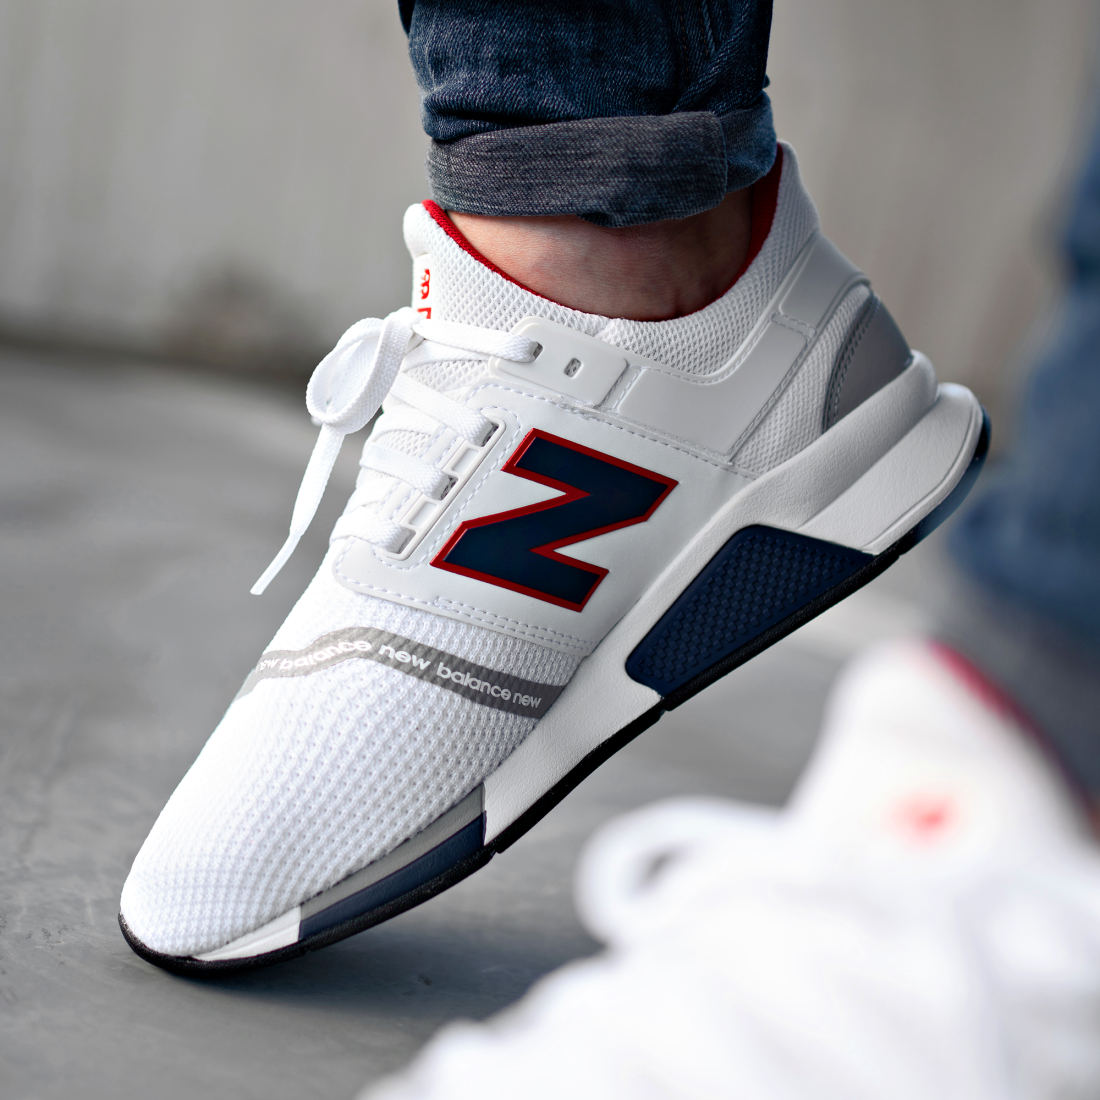 new balance 247 v2 blanche buy clothes shoes online